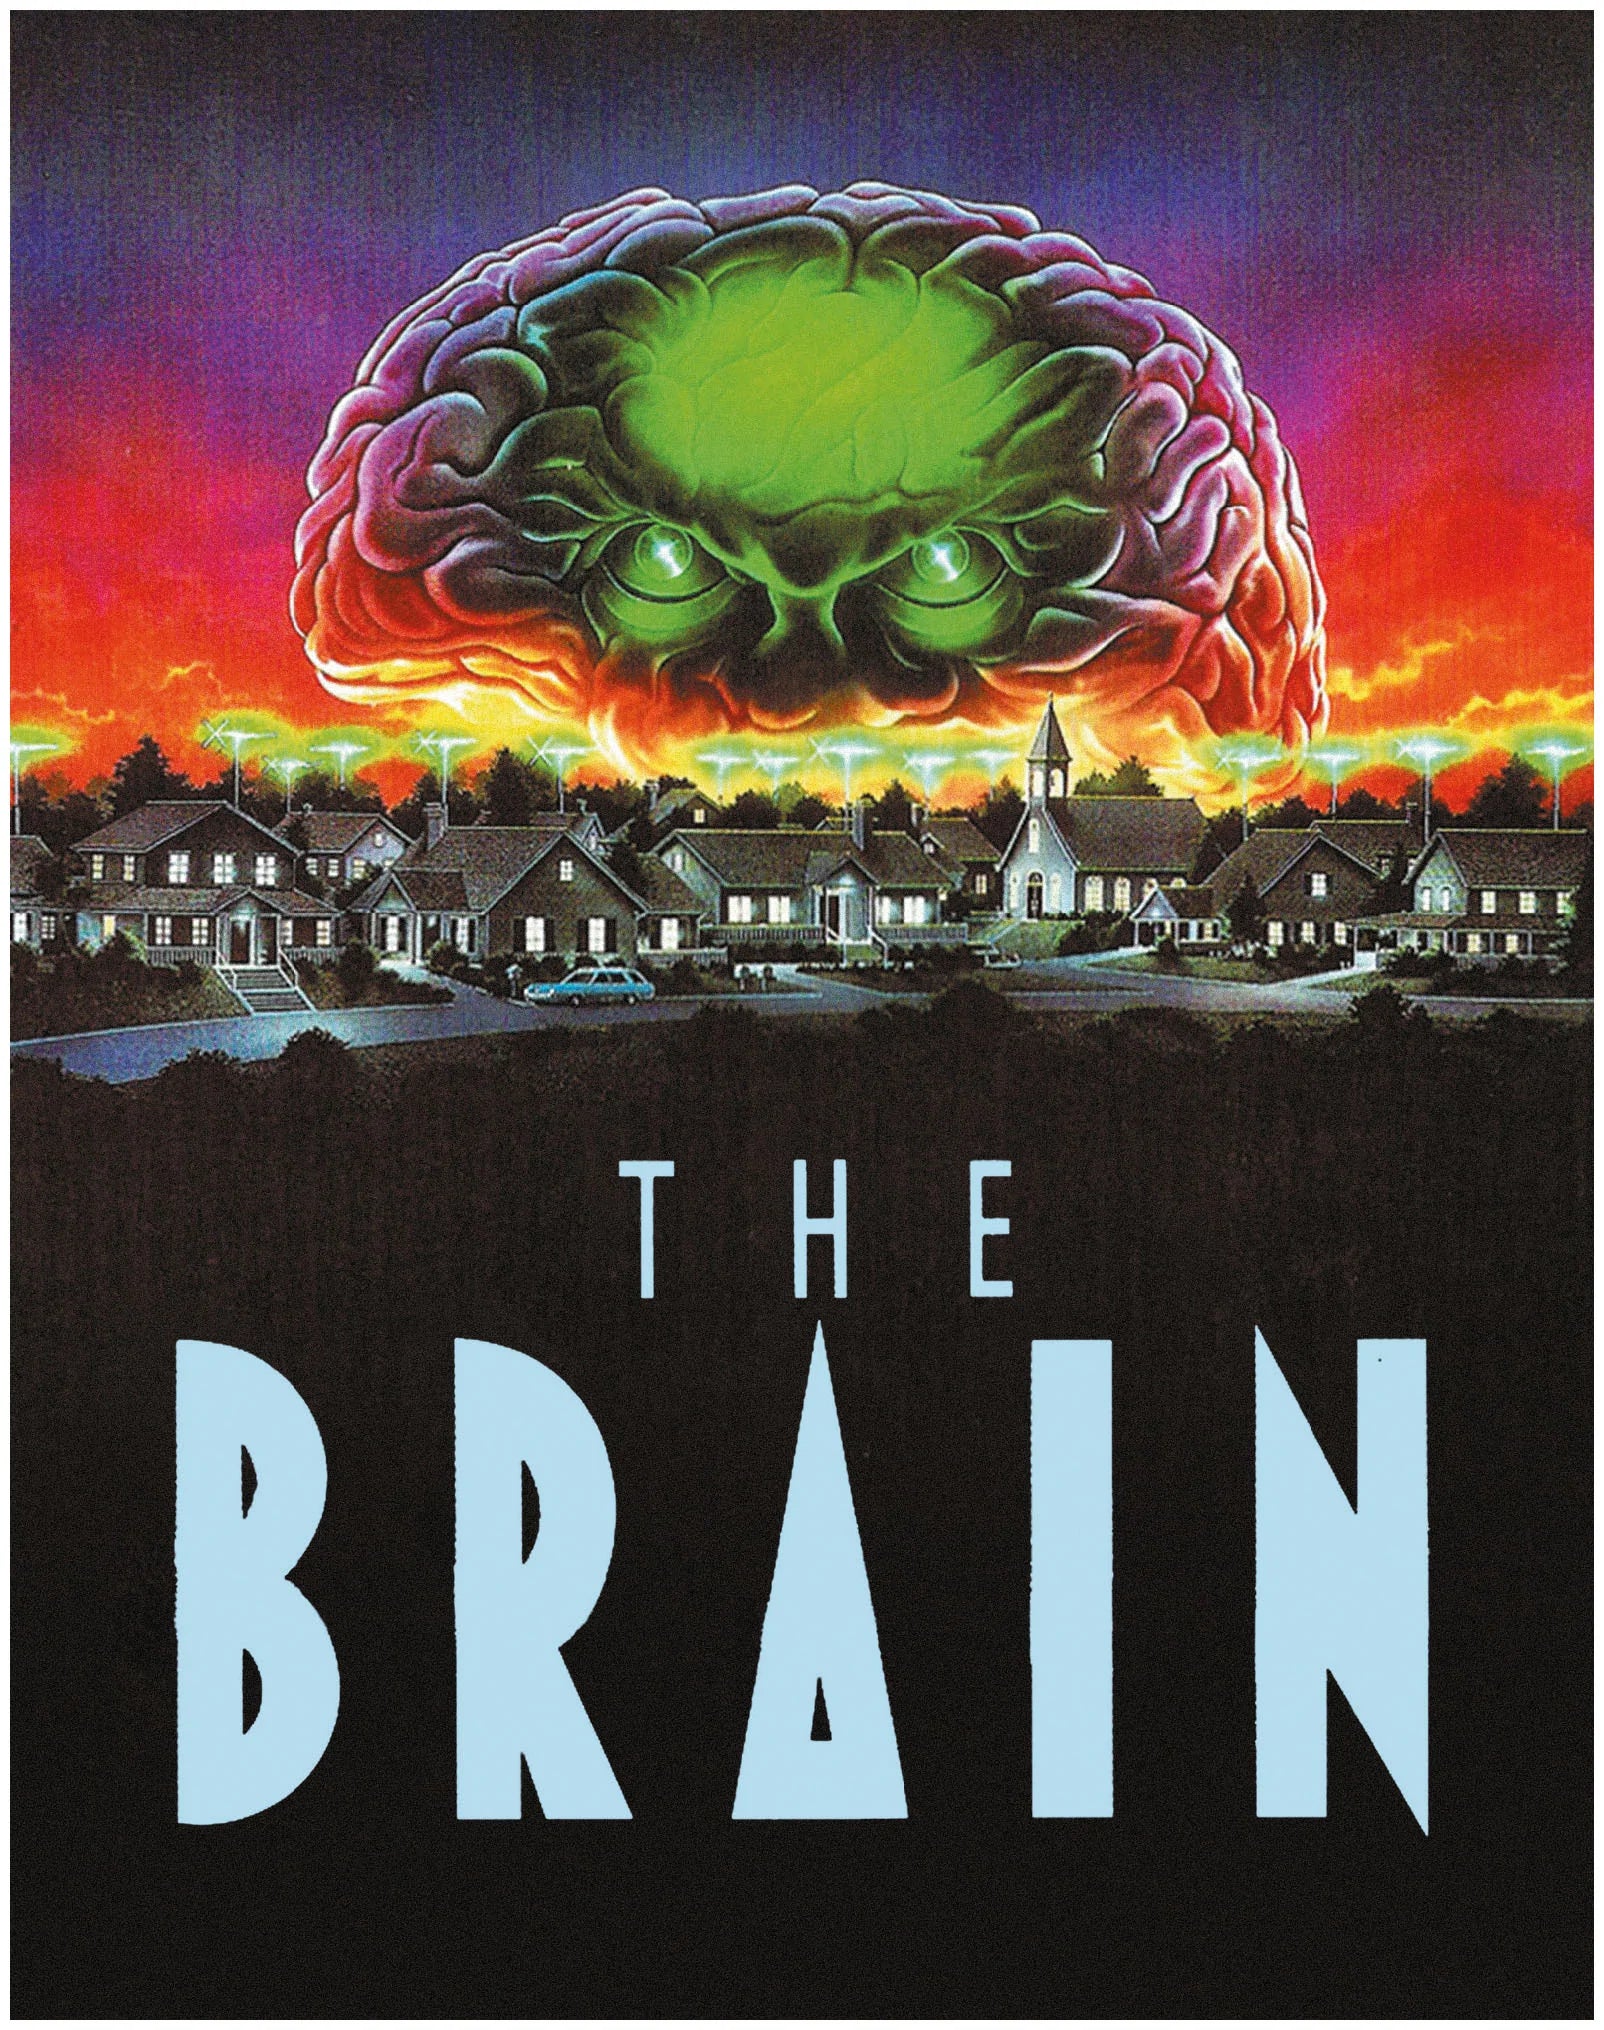 The Brain by Ed Hunt available from 23.08. as mediabook and at VoD portals  